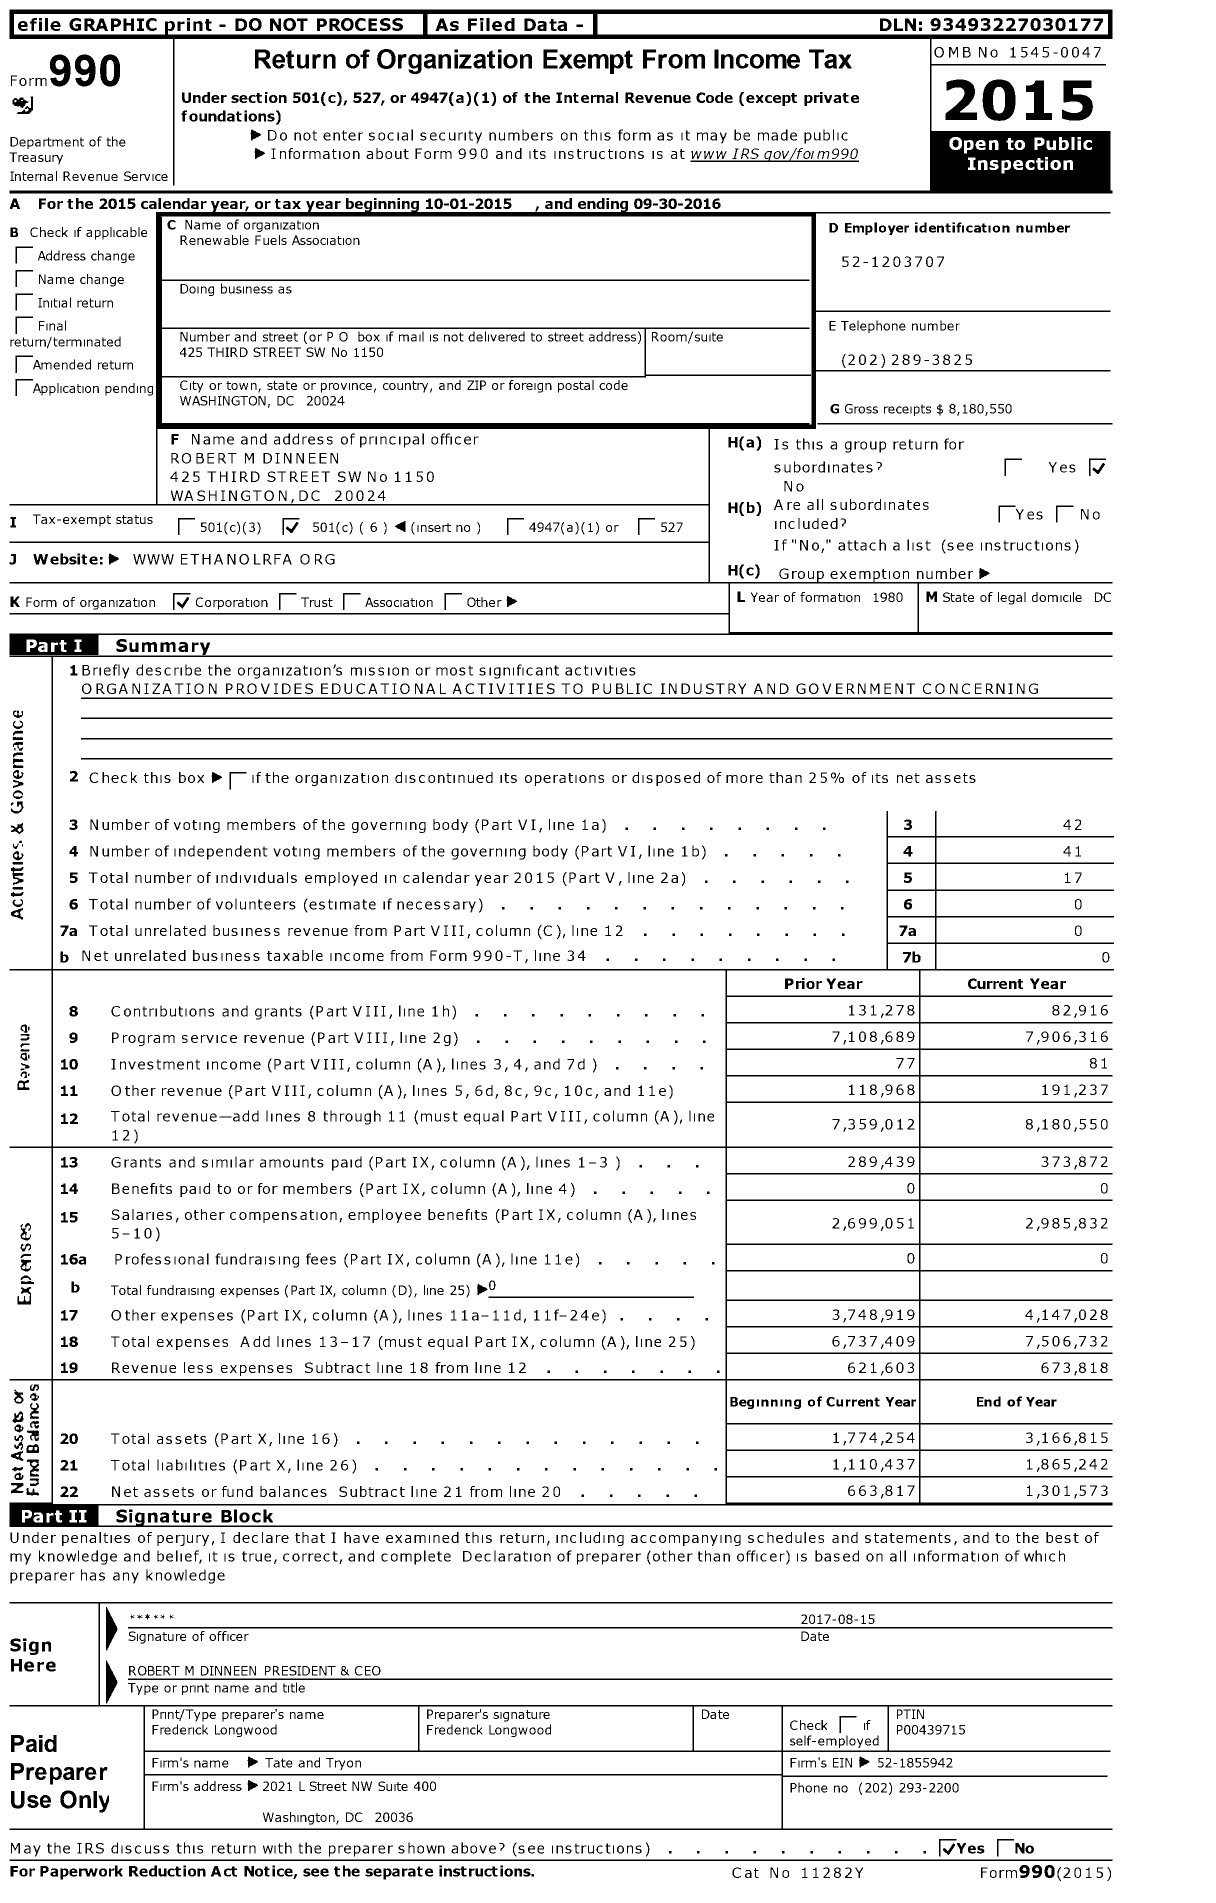 Image of first page of 2015 Form 990O for Renewable Fuels Association (RFA)